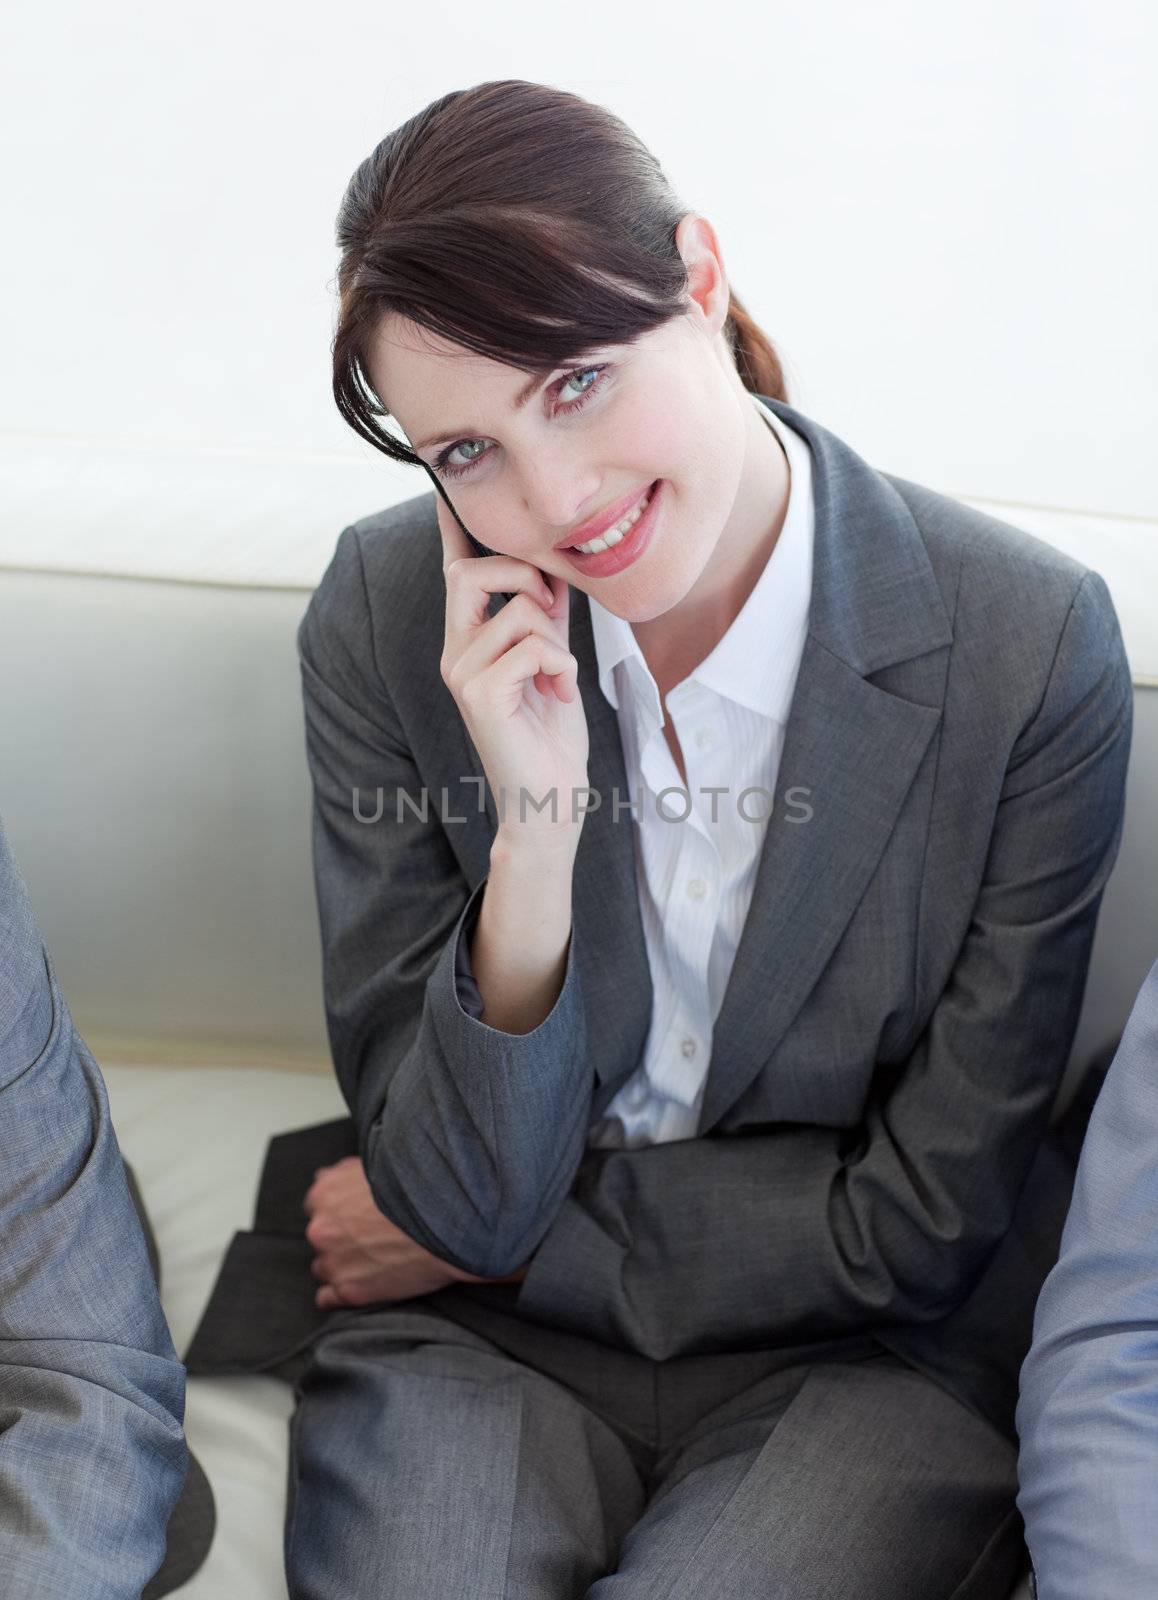 Businesswoman on phone sitting in a waiting room by Wavebreakmedia